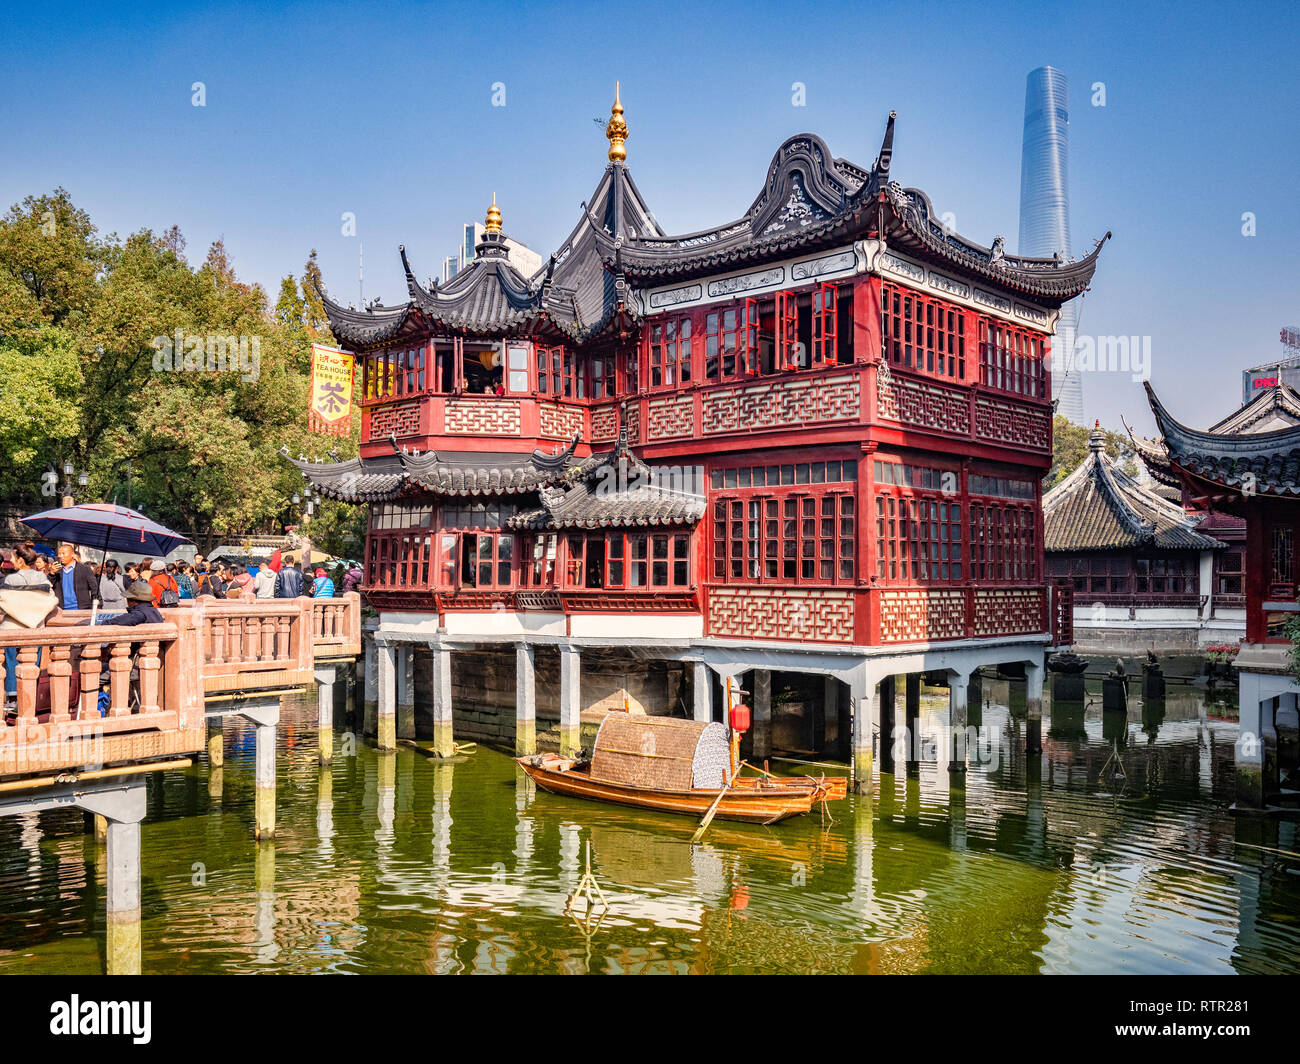 29 November 2018 - Shanghai, China  -  The Huxinting Tea House and Nine Turn Bridge in the Yu Garden area of the Old Town, Shanghai Stock Photo